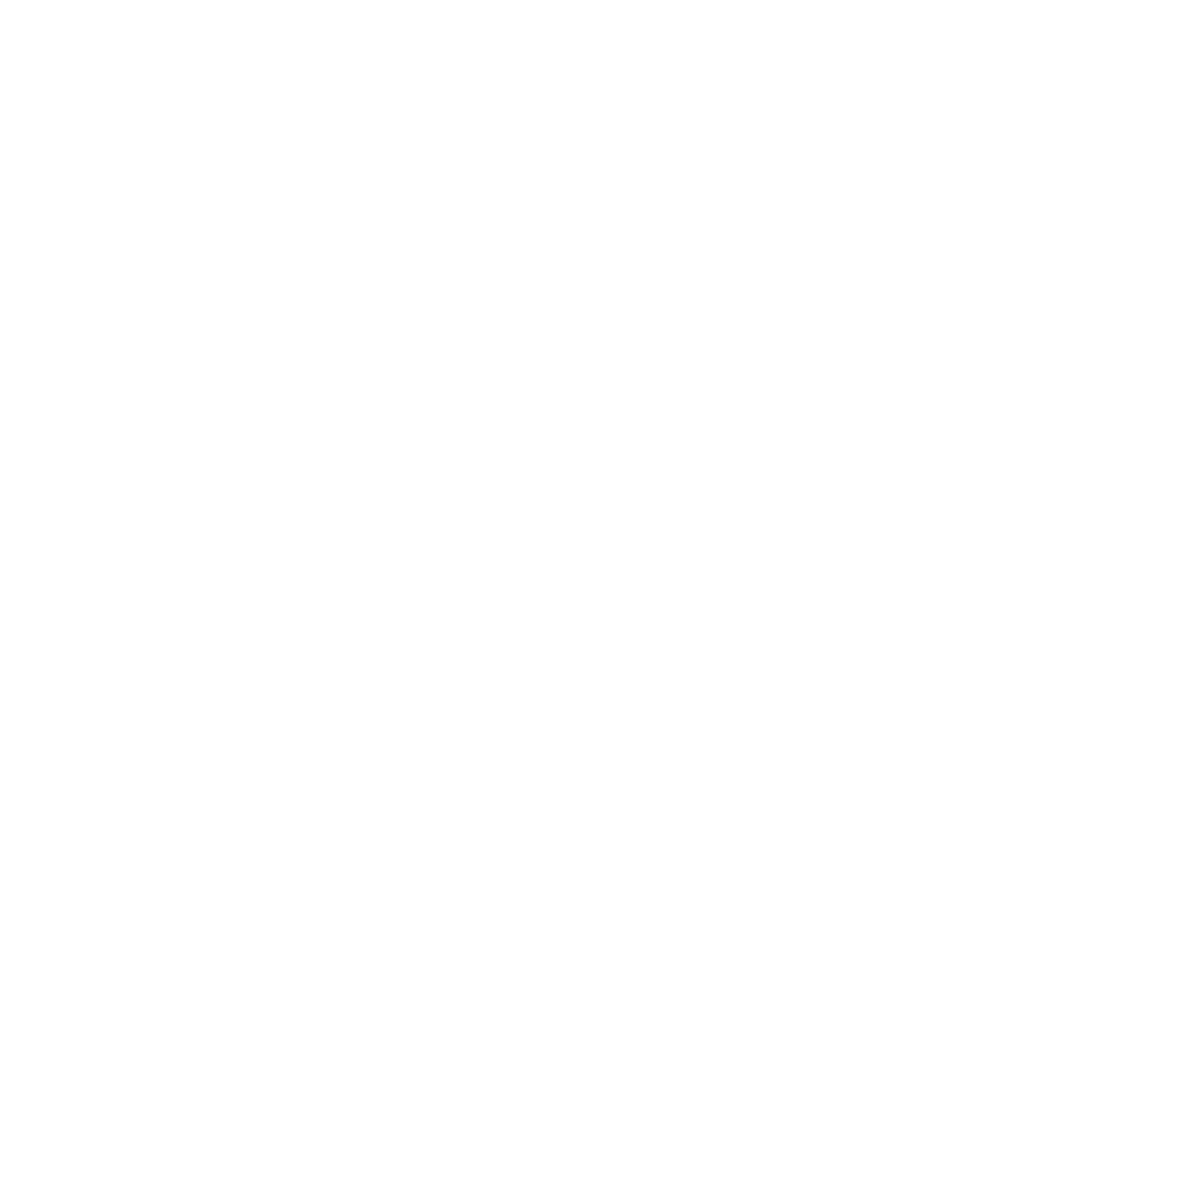 The Price of Freedom Foundation